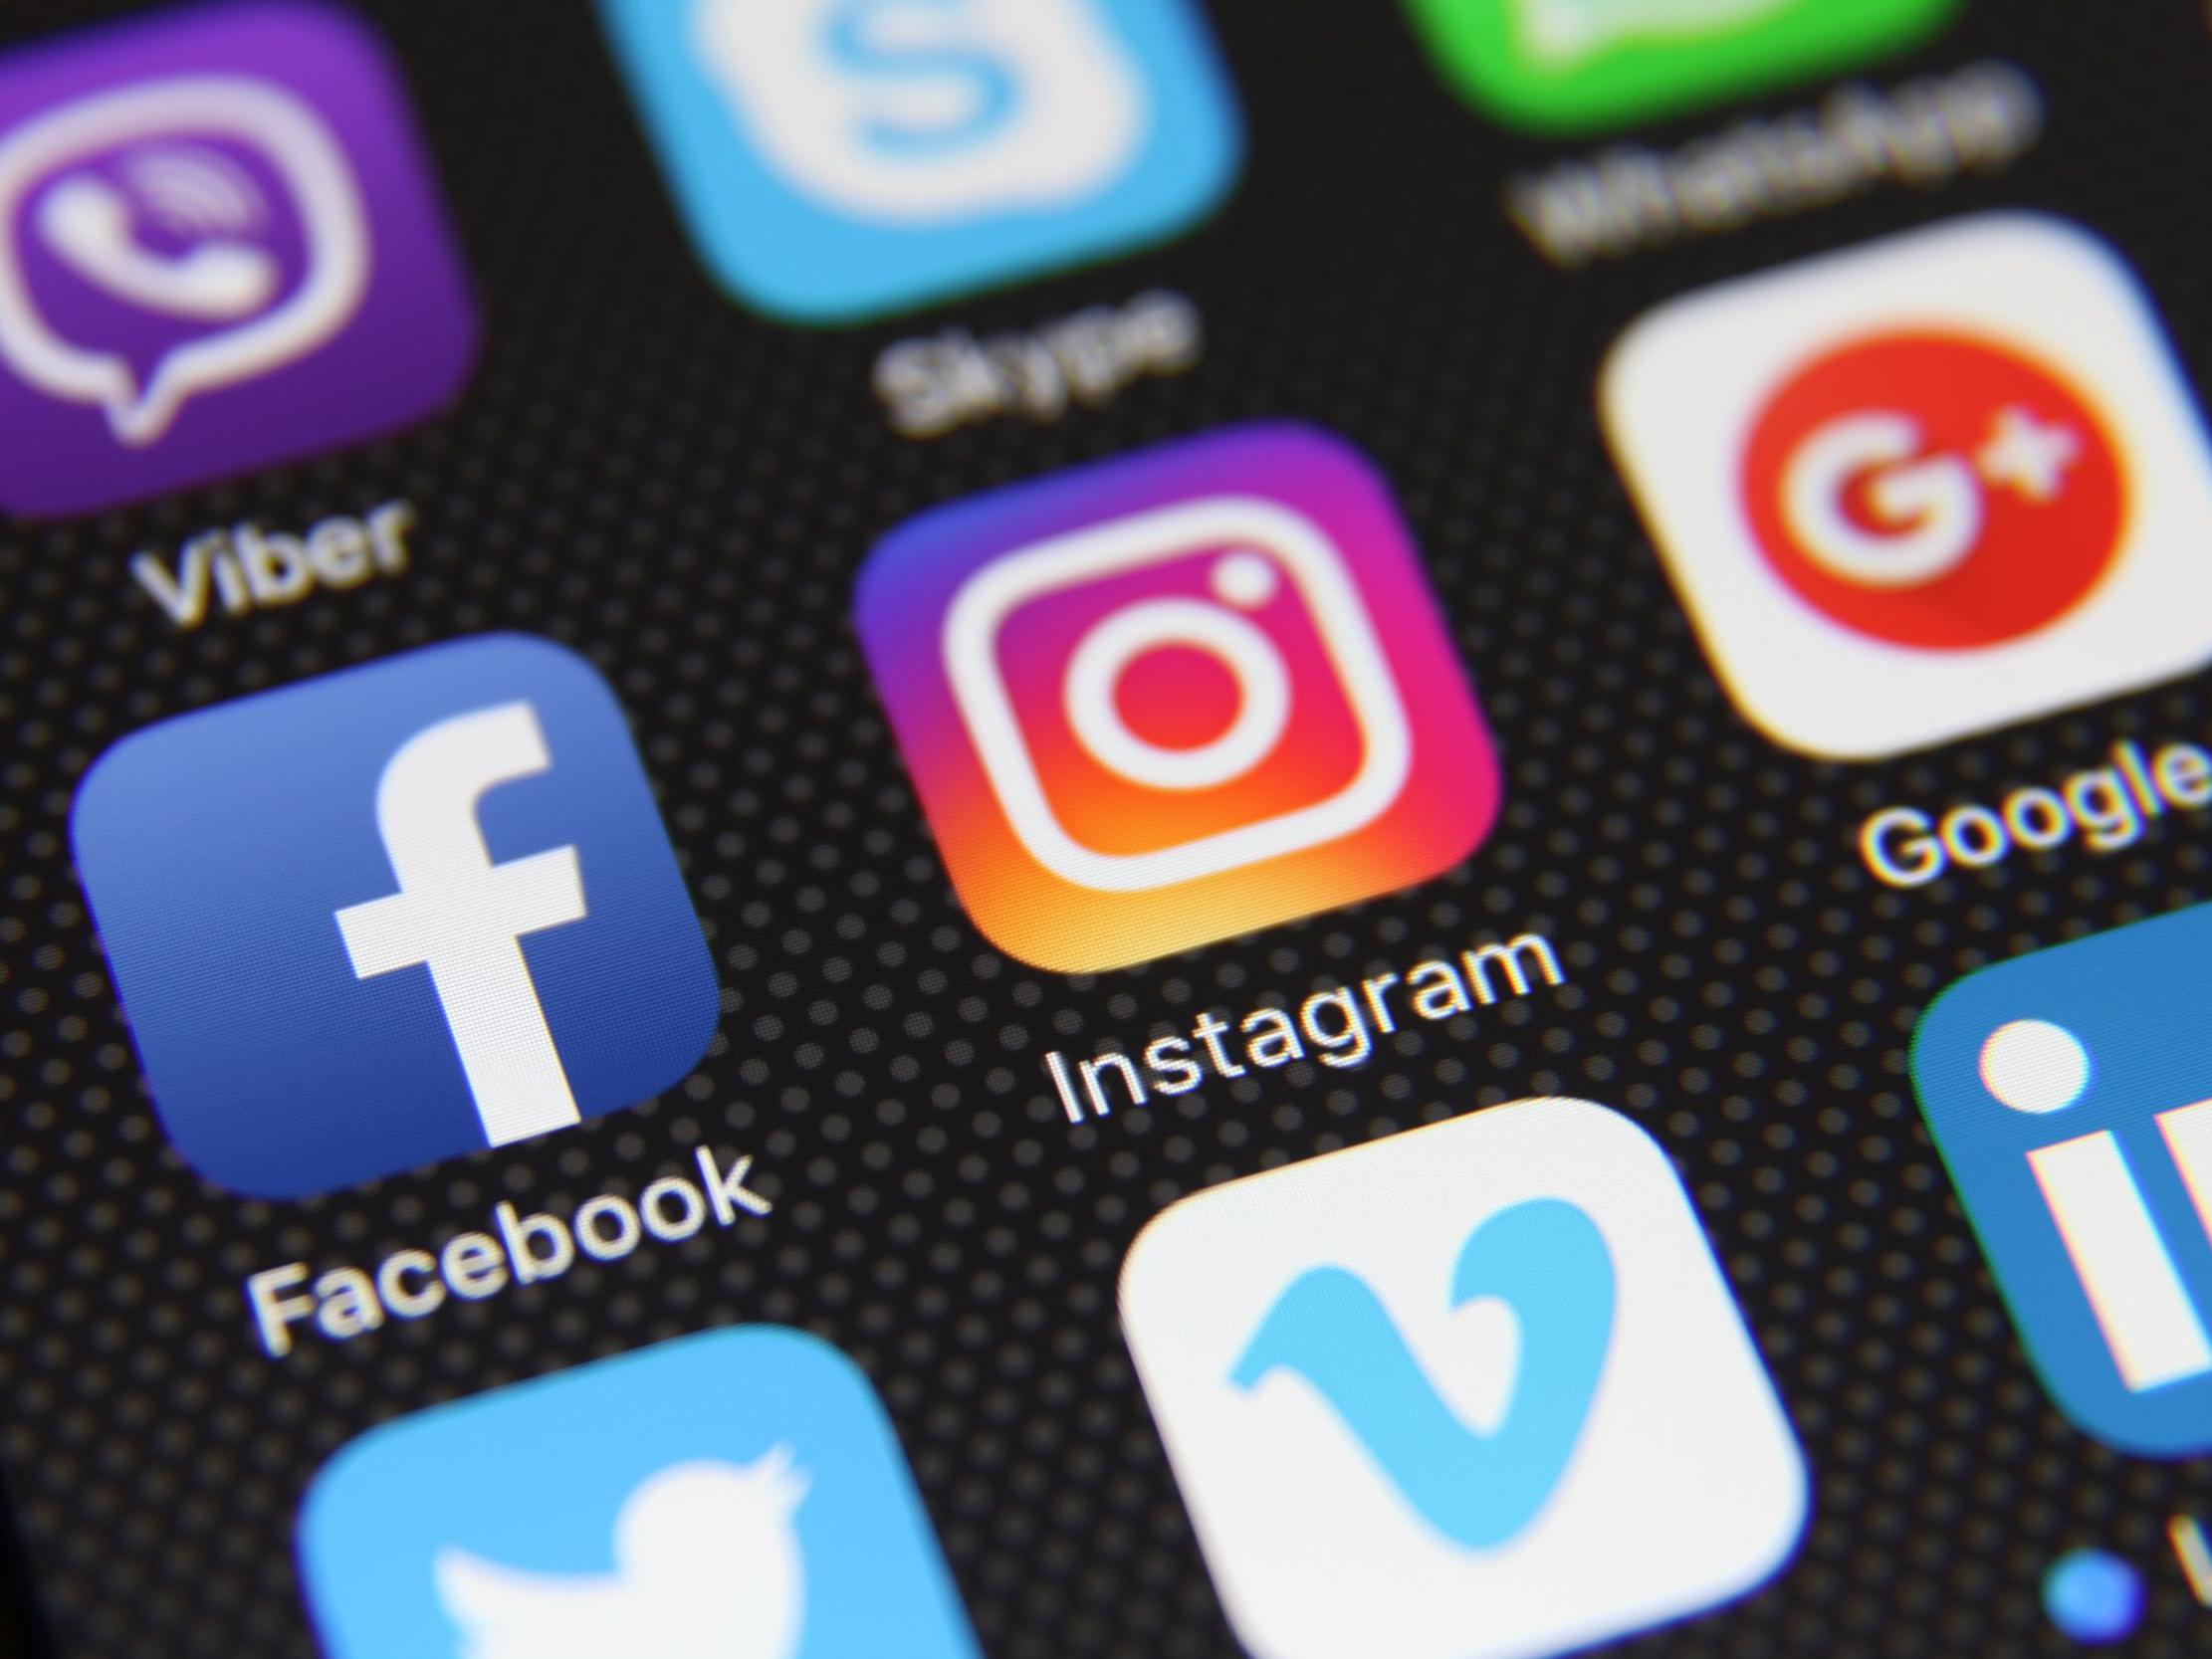 The proportion of UK adults using social media for news has risen from 44 per cent last year to 49 per cent this year, according to the report